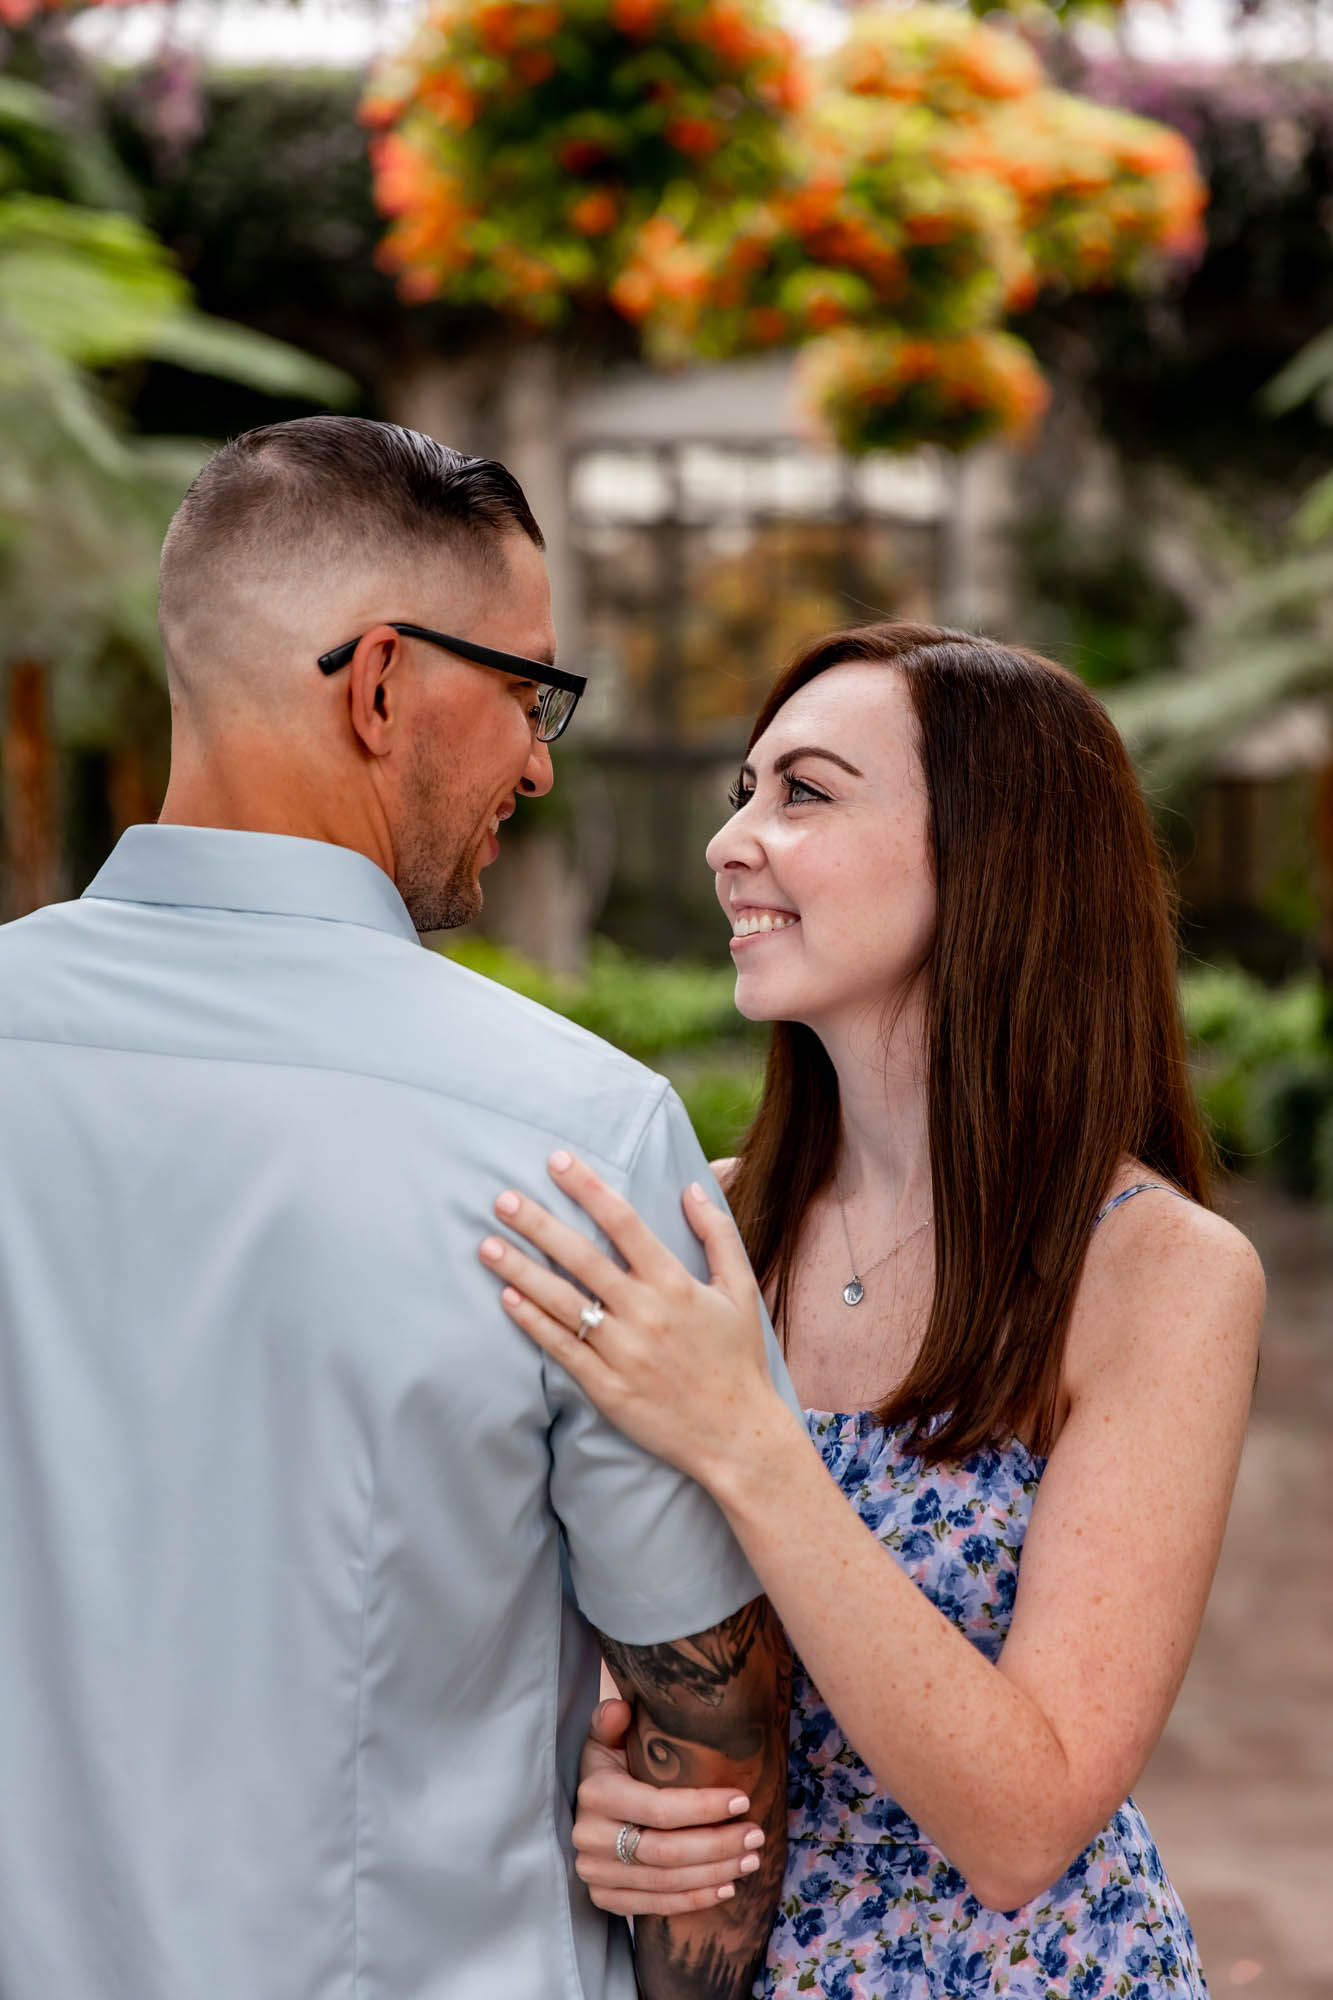 longwood gardens proposal and engagement photos